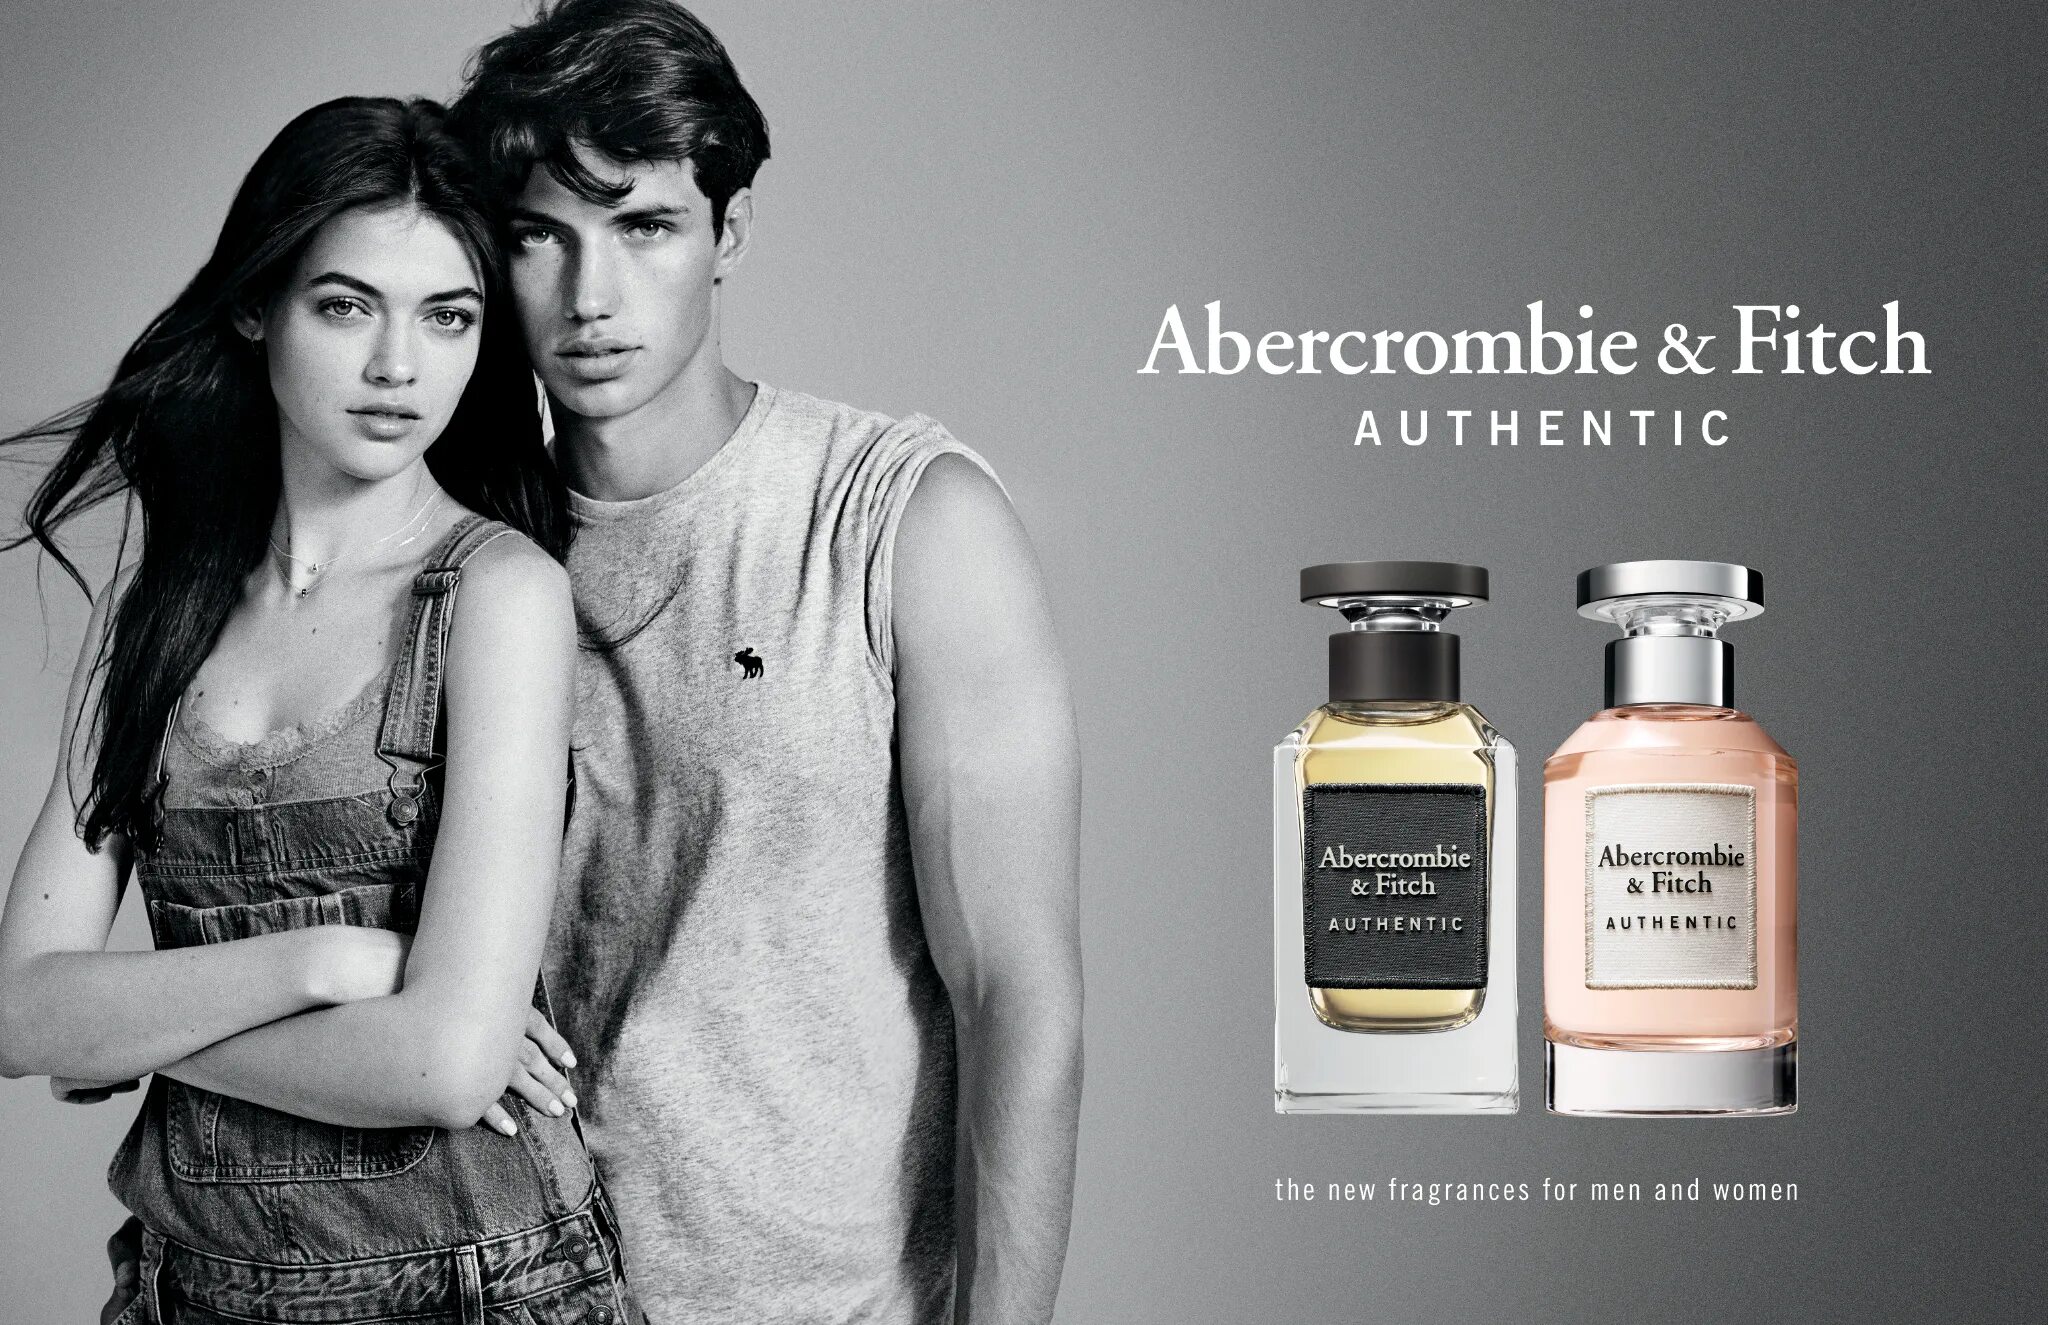 Abercrombie Fitch authentic woman 50 ml. Духи Abercrombie Fitch authentic women. Abercrombie Fitch authentic men 50ml. Туалетная вода Abercrombie & Fitch authentic man. Authentic туалетная вода